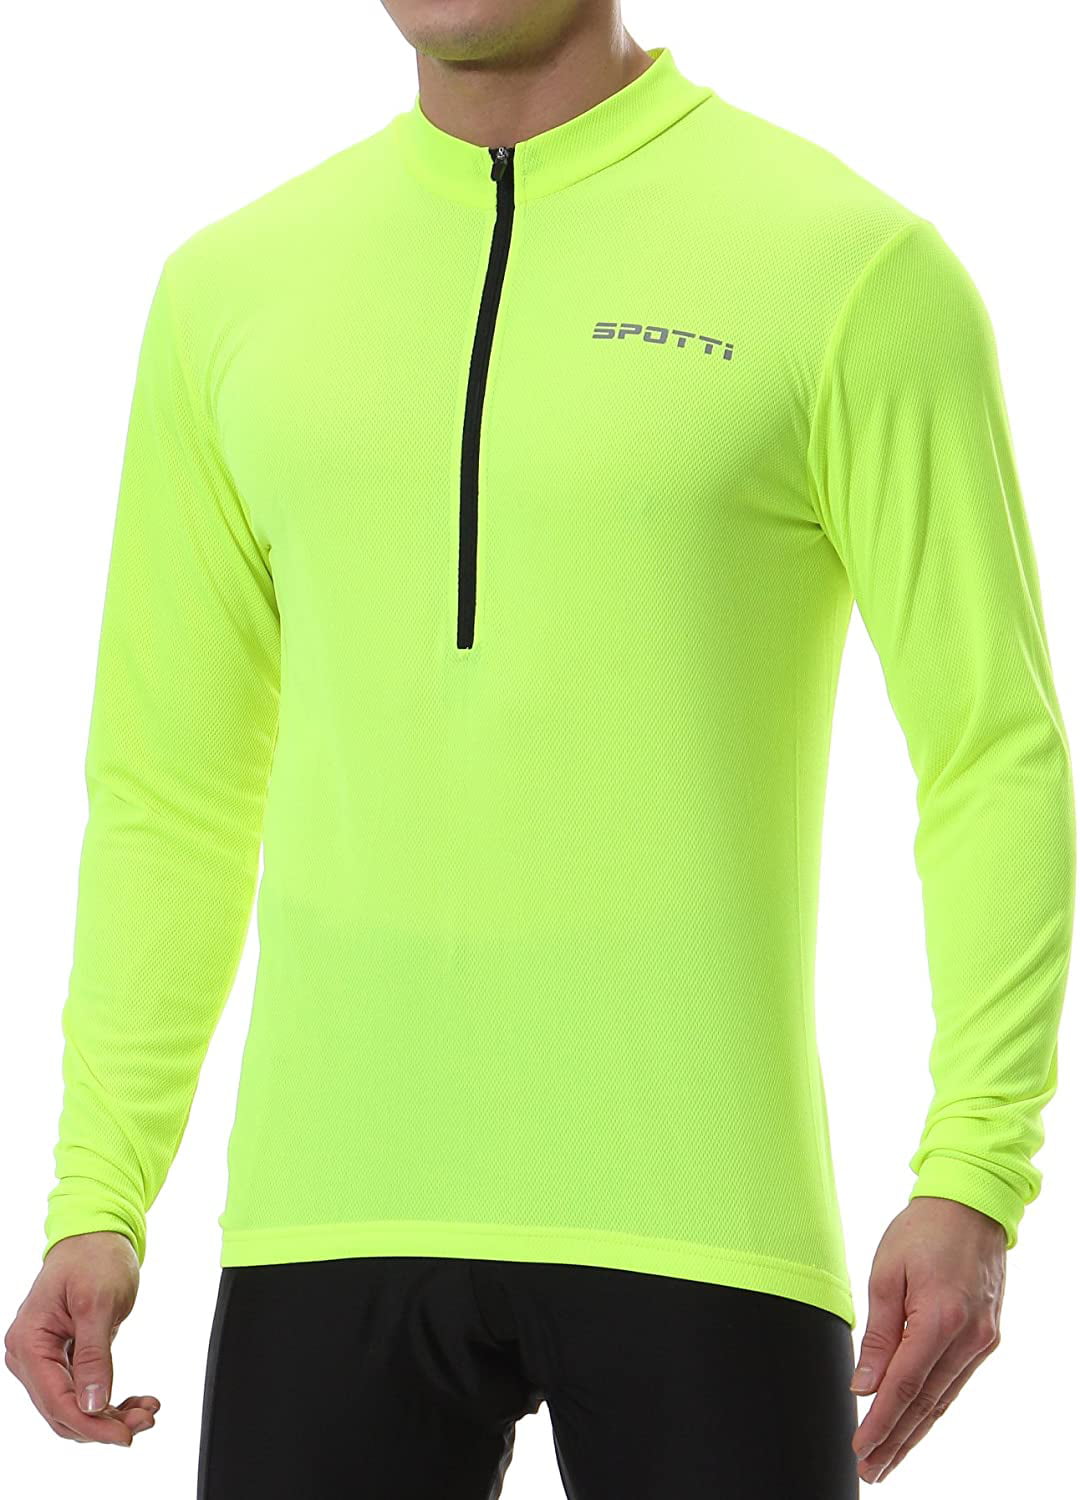 Spotti Men's Cycling Bike Jersey Long Sleeve with 3 Rear Pockets Quick Dry Biking Shirt Breathable Moisture Wicking 